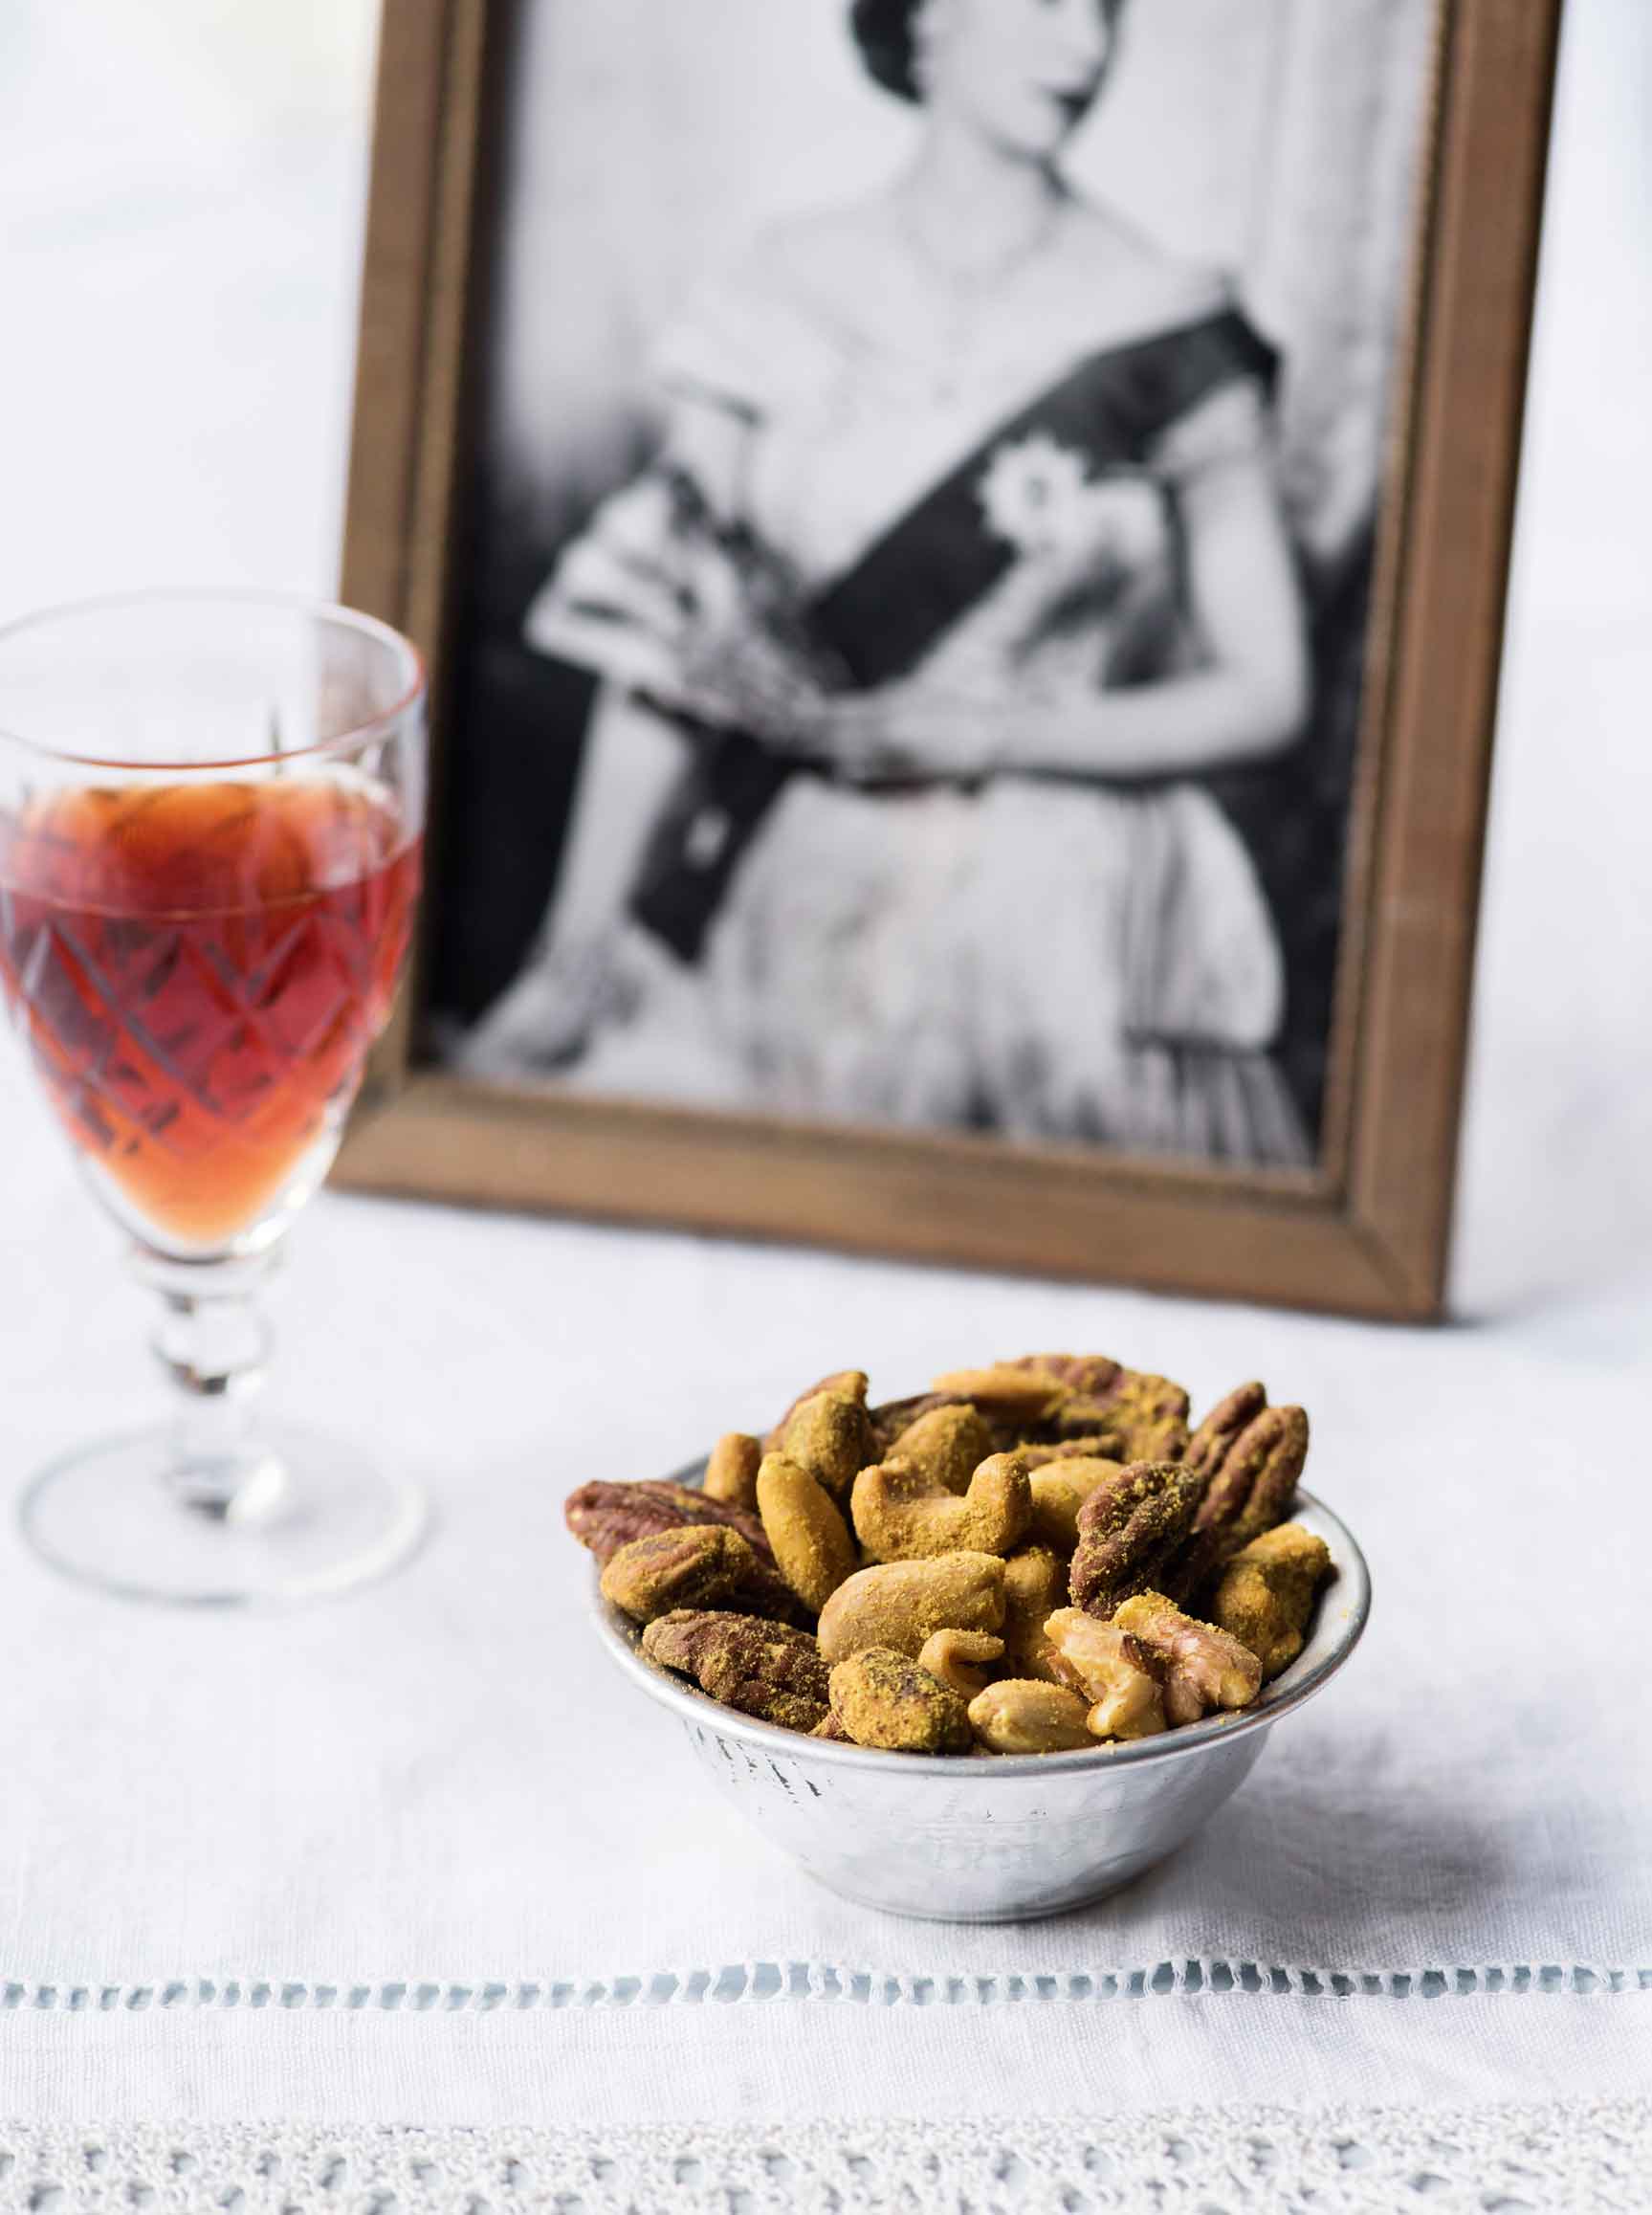 THE QUEEN’S BOMBAY NUTS